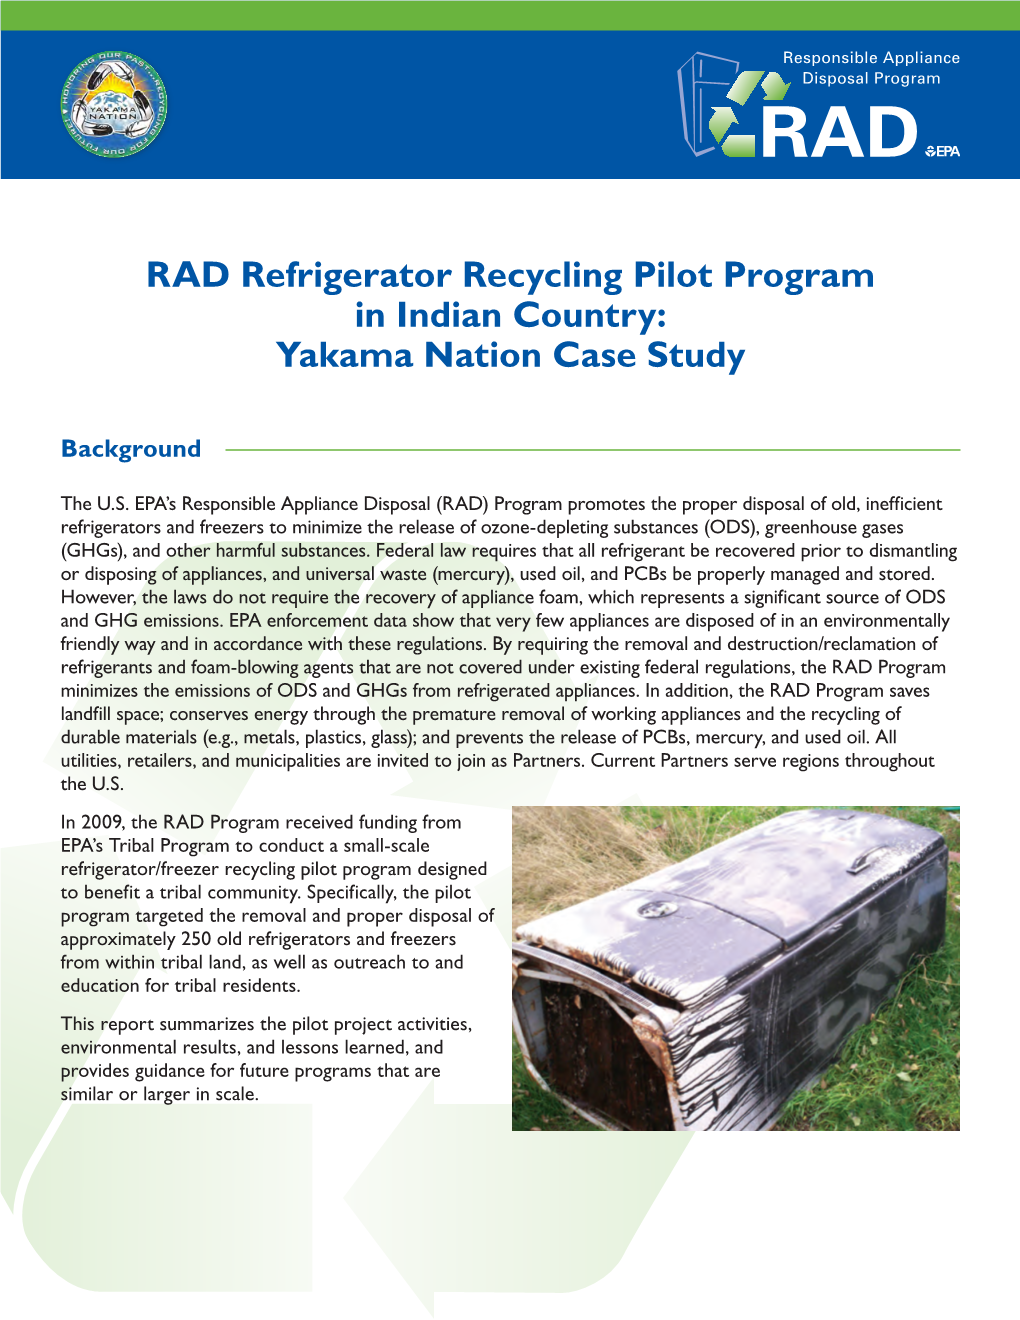 RAD Refrigerator Recycling Pilot Program in Indian Country: Yakama Nation Case Study